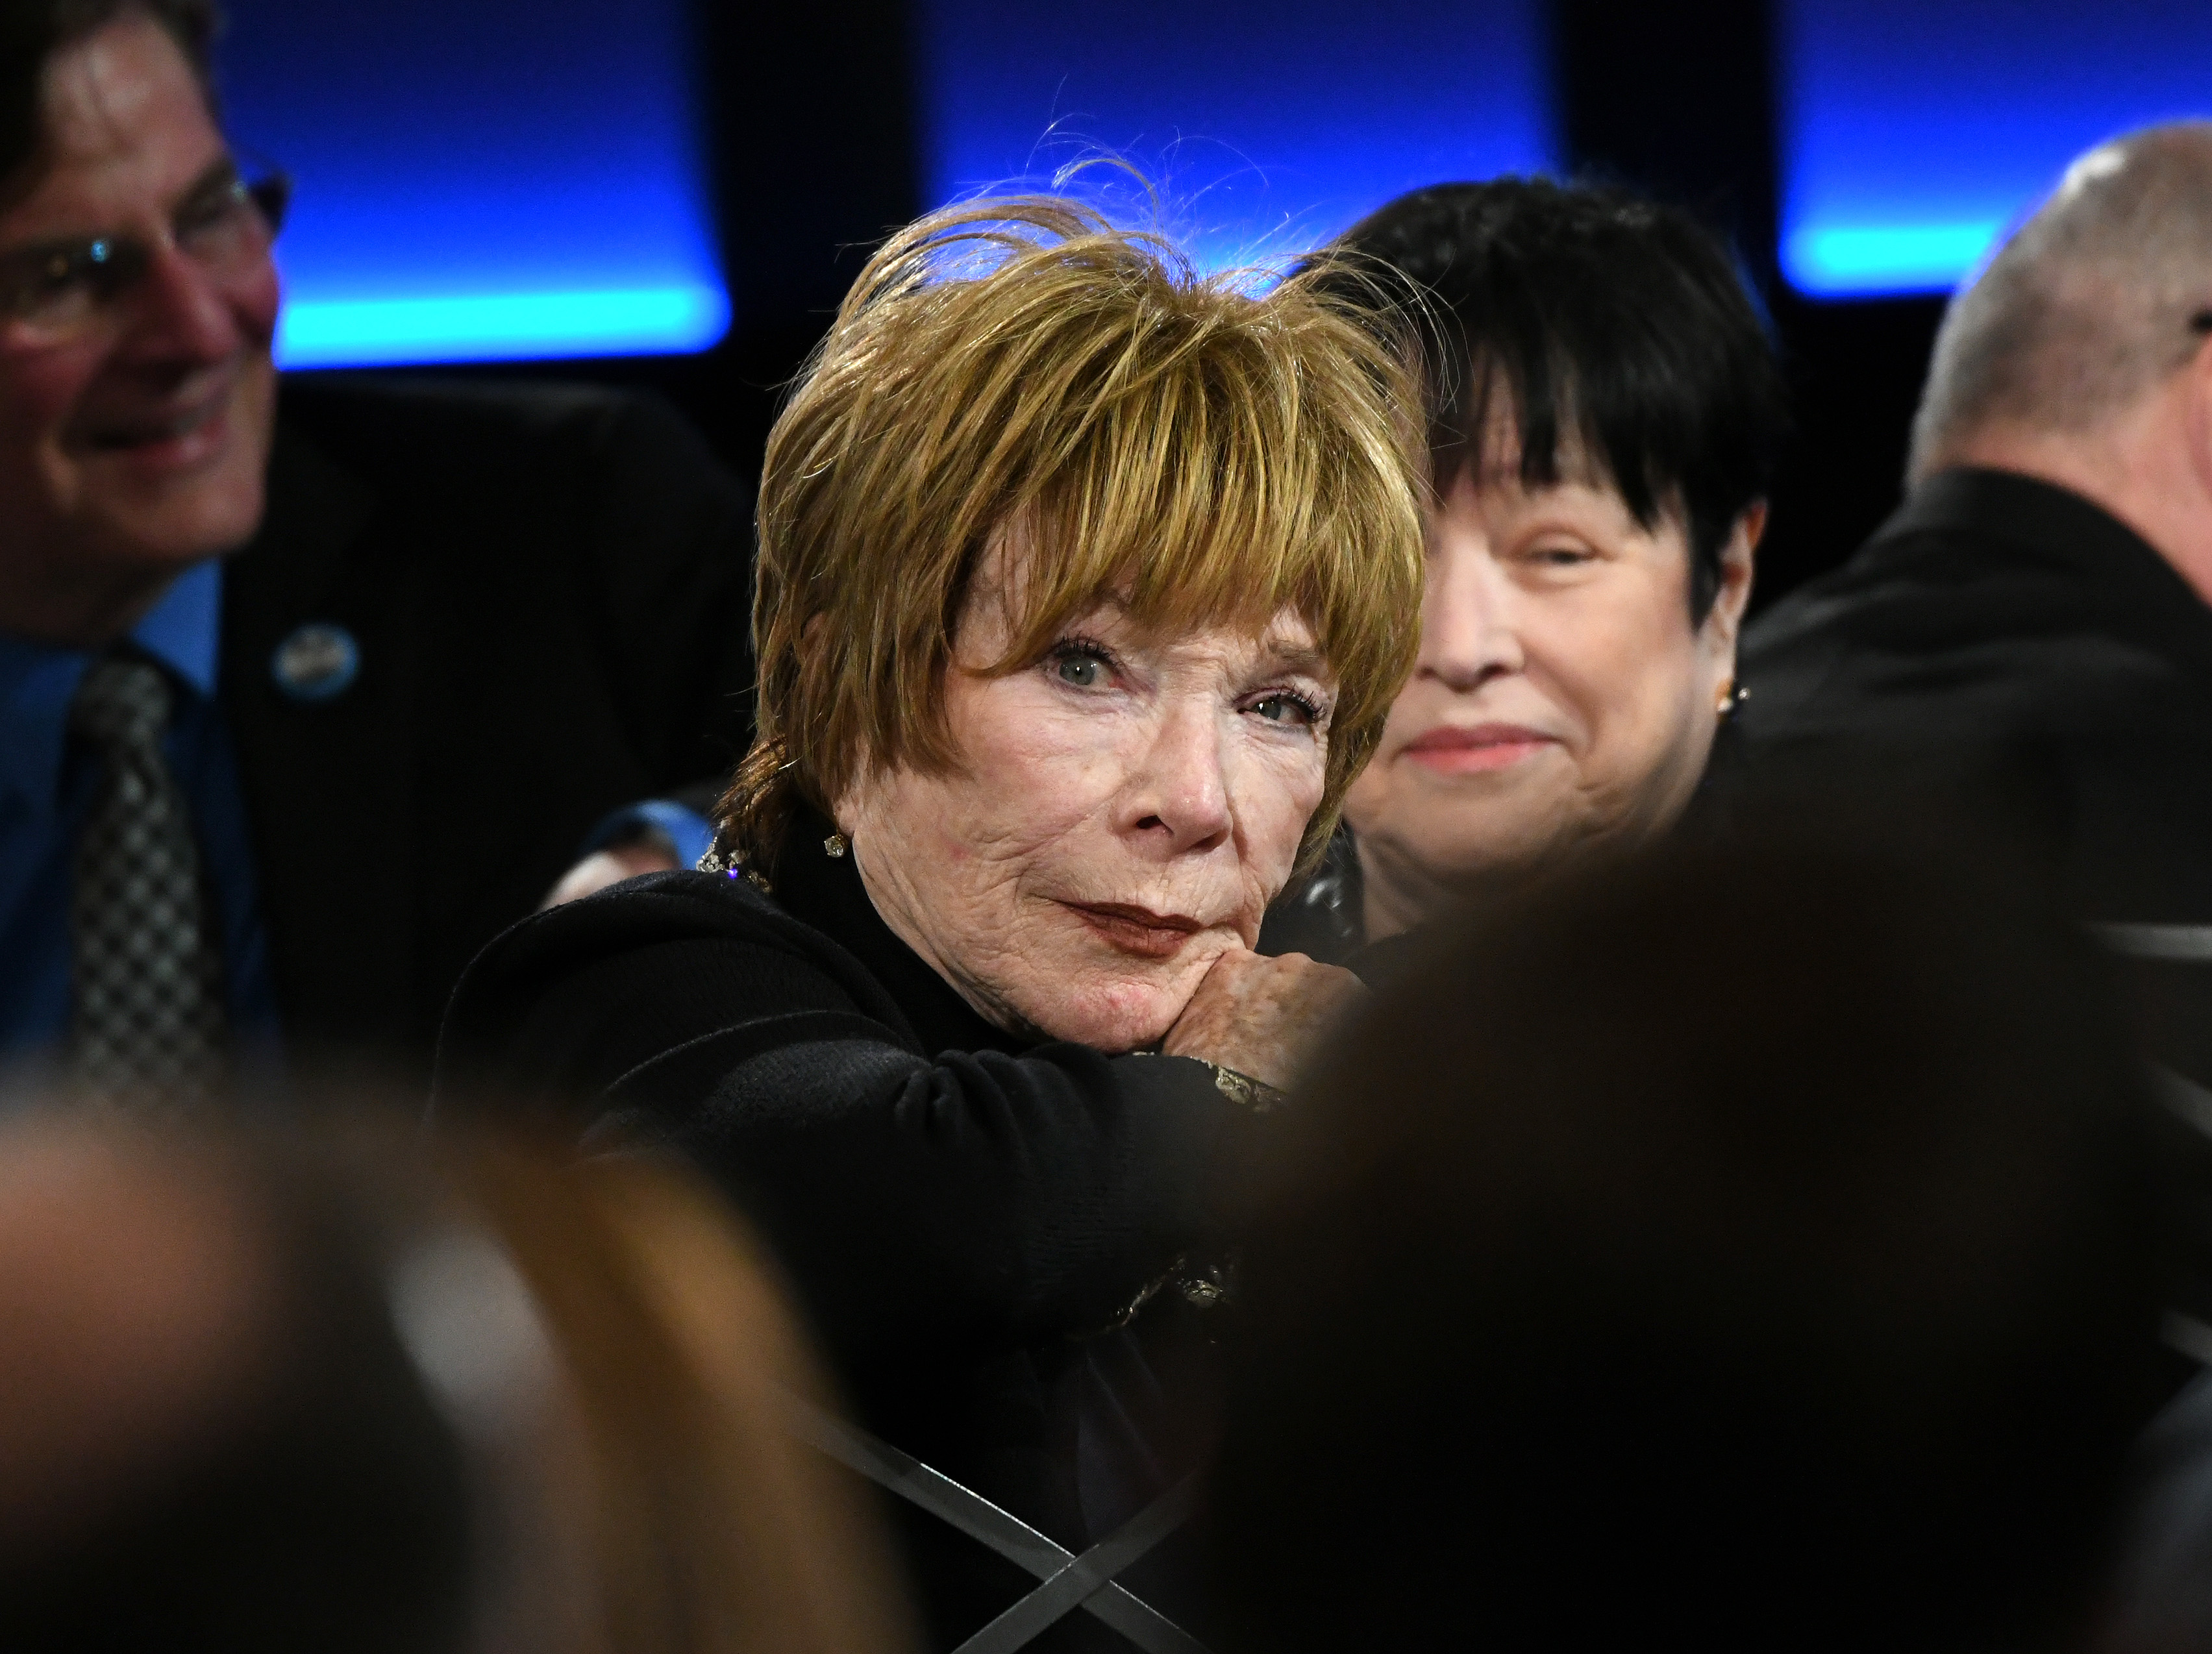 Shirley MacLaine attends AARP The Magazine's 18th Annual Movies for Grownups Awards at the Beverly Wilshire Four Seasons Hotel on February 04, 2019 in Beverly Hills, California. | Source: Getty Images